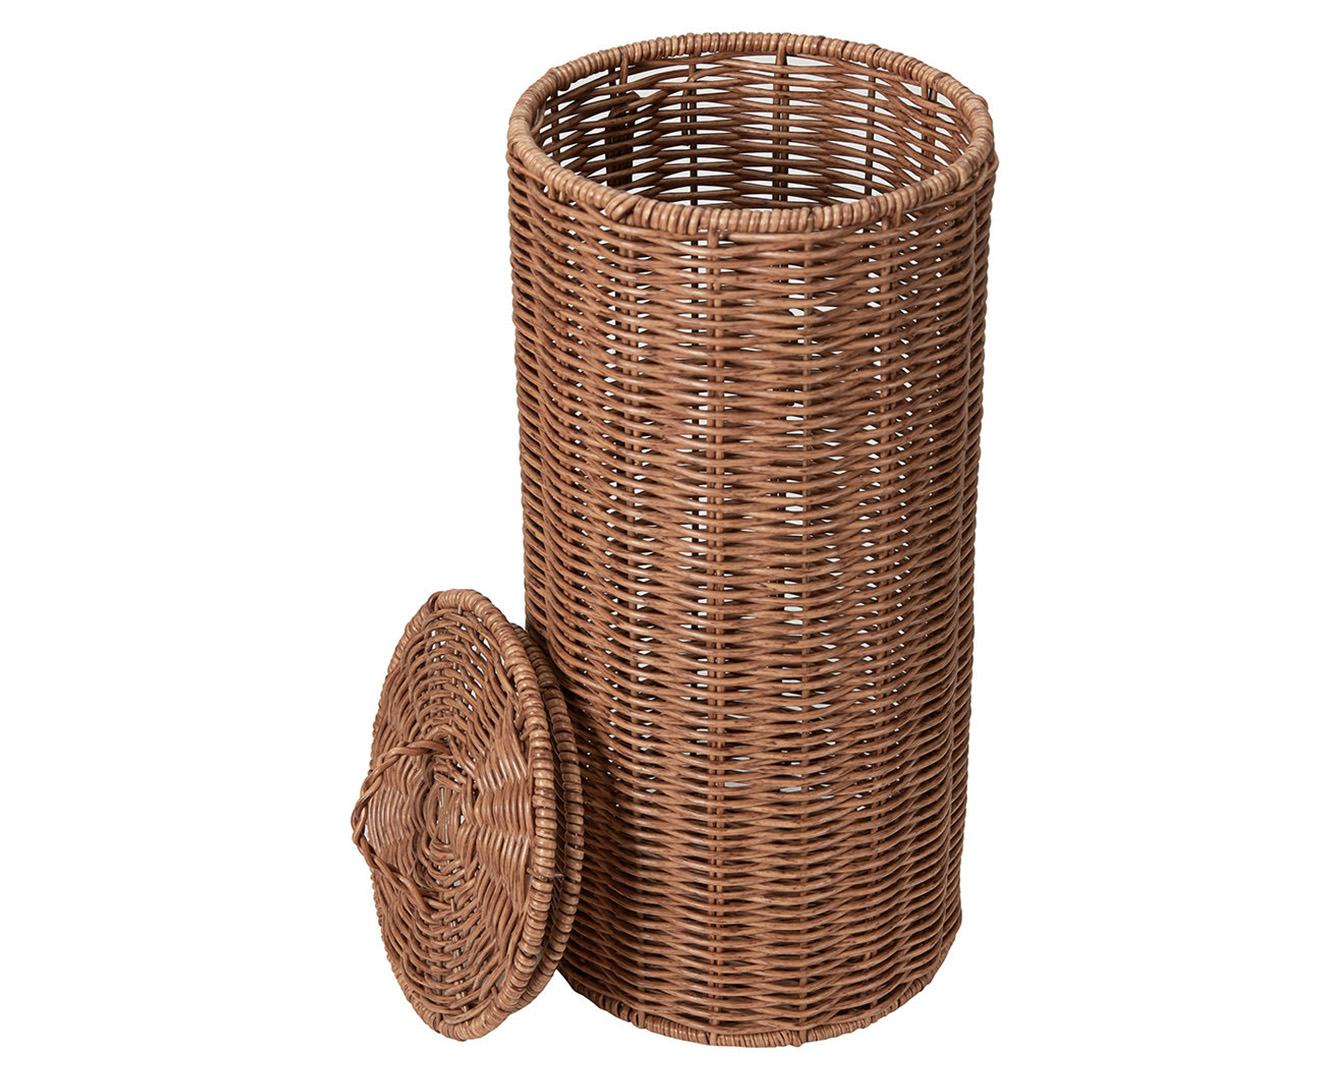 Anko by Kmart Rattan Look Toilet Roll Holder w/ Lid - Natural | Catch